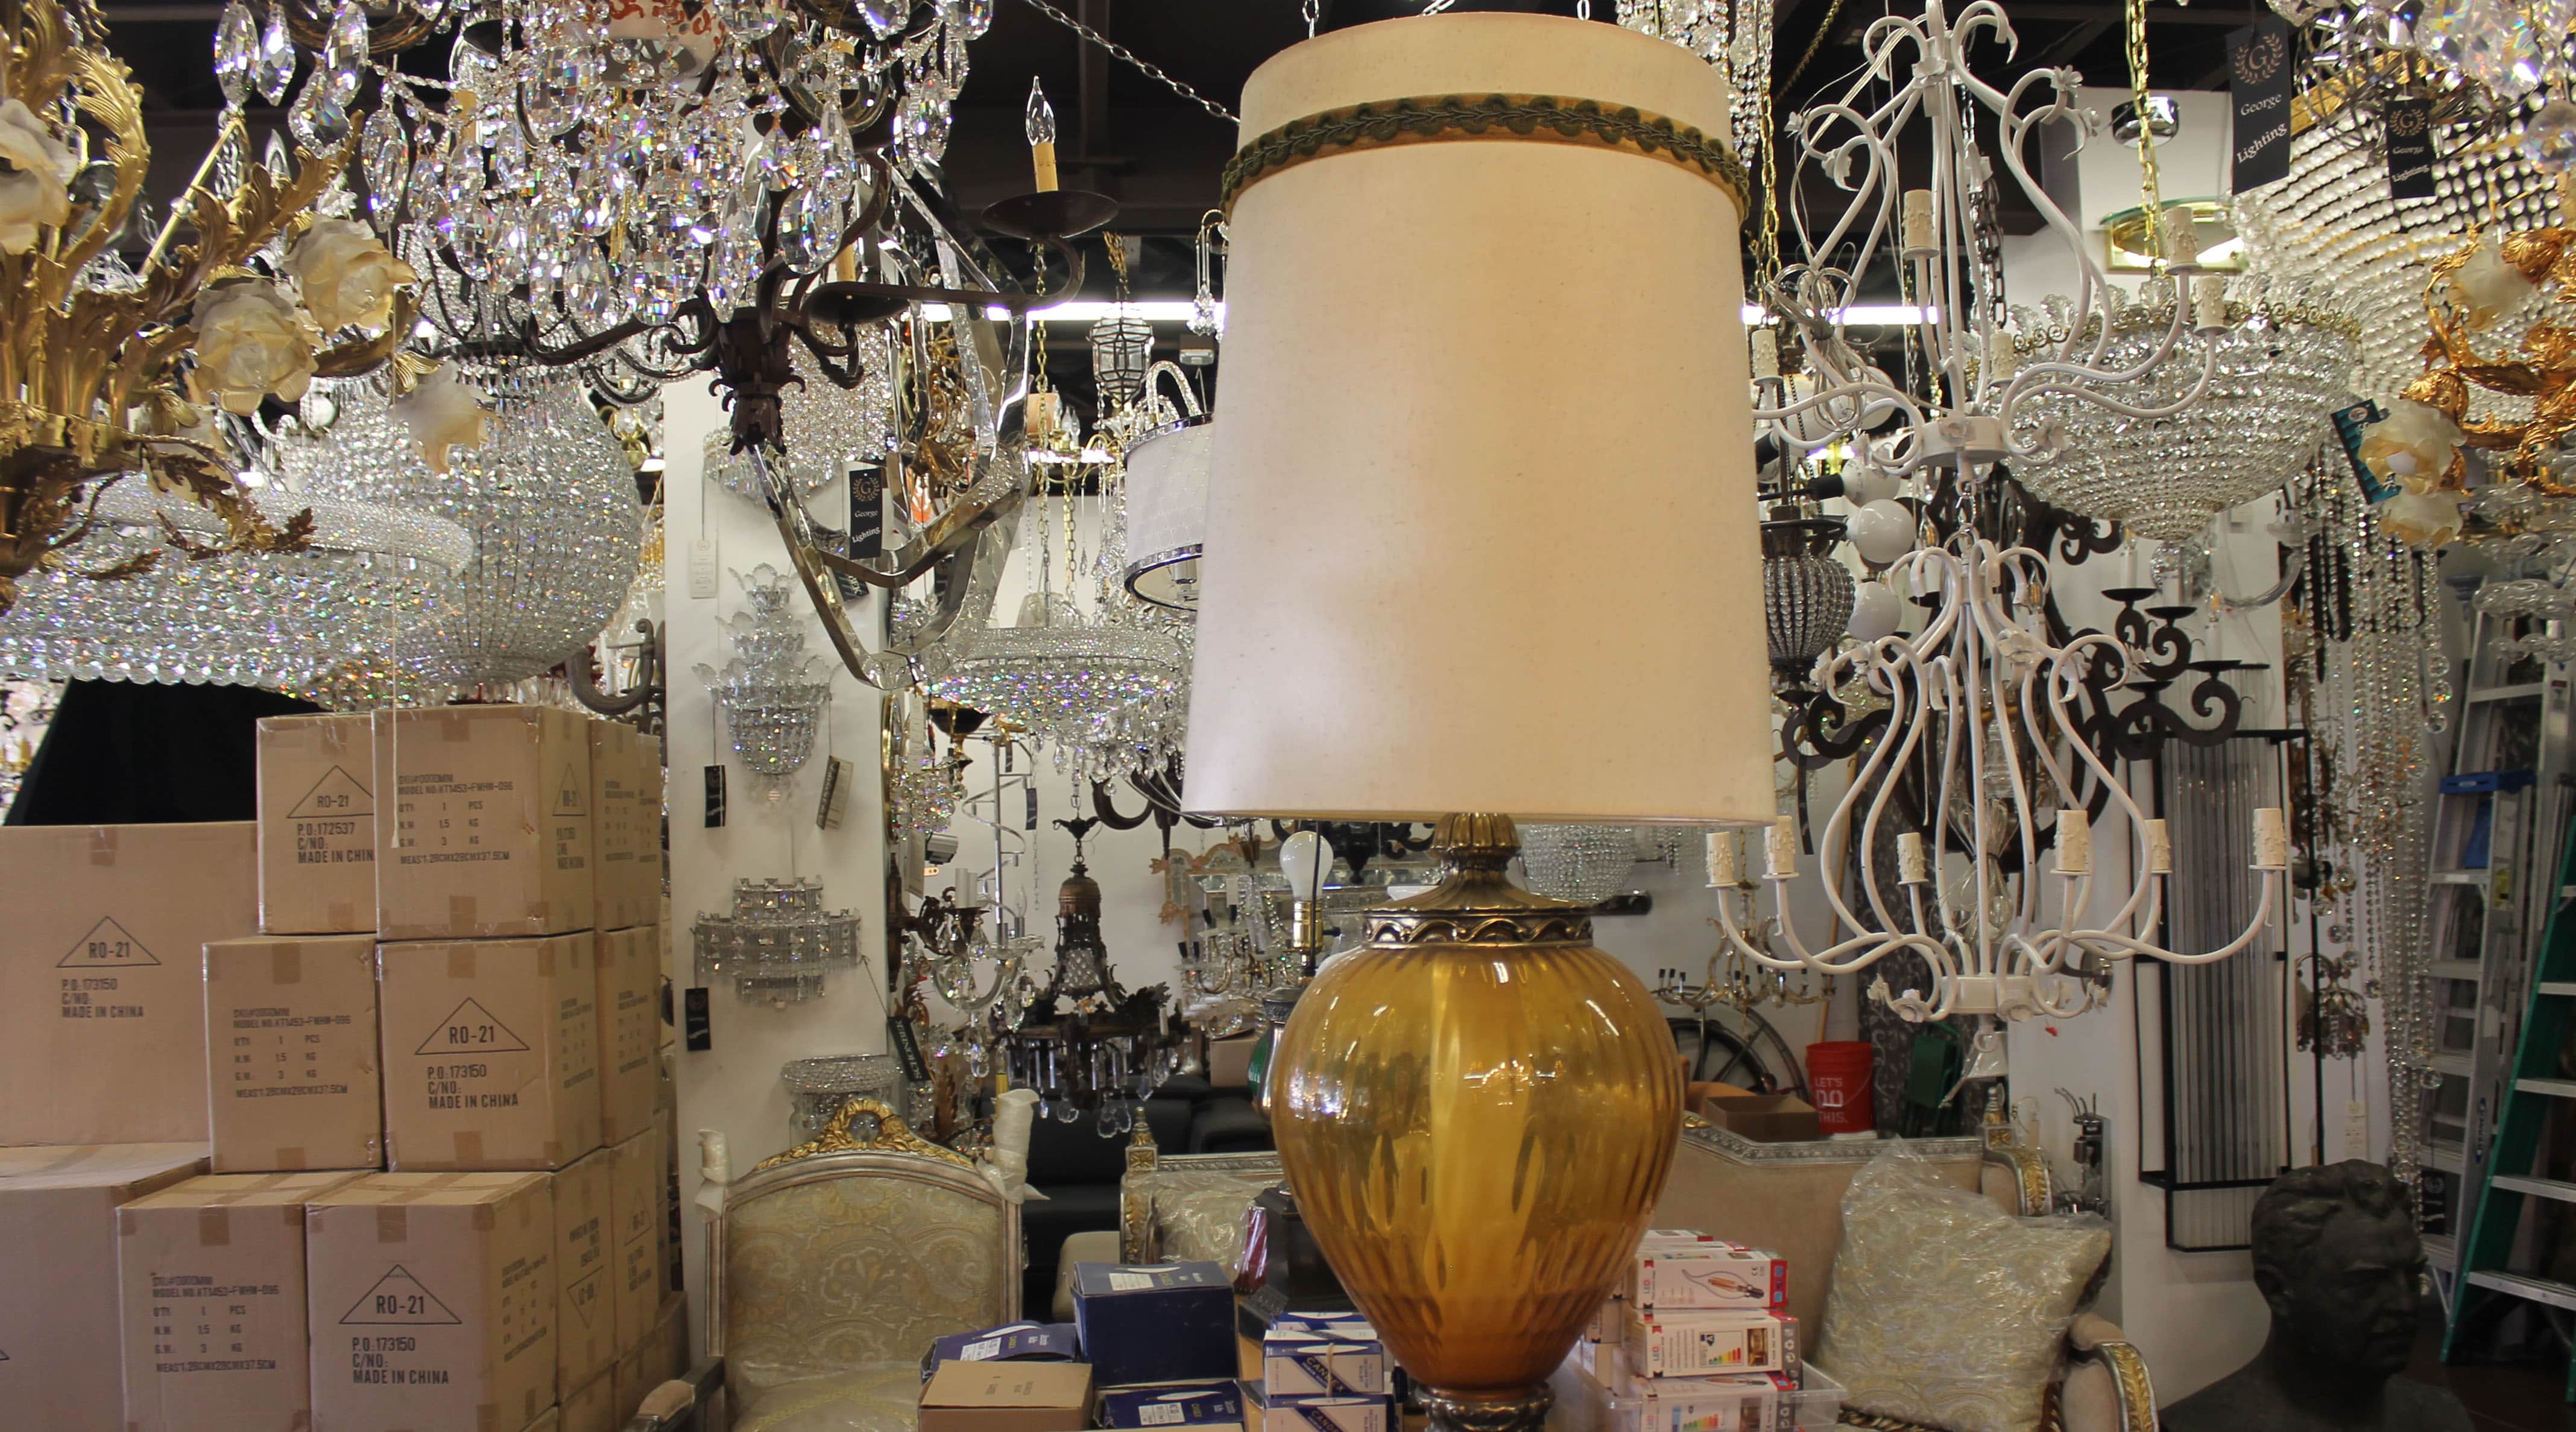 shop filled with vintage chandeliers and lamps